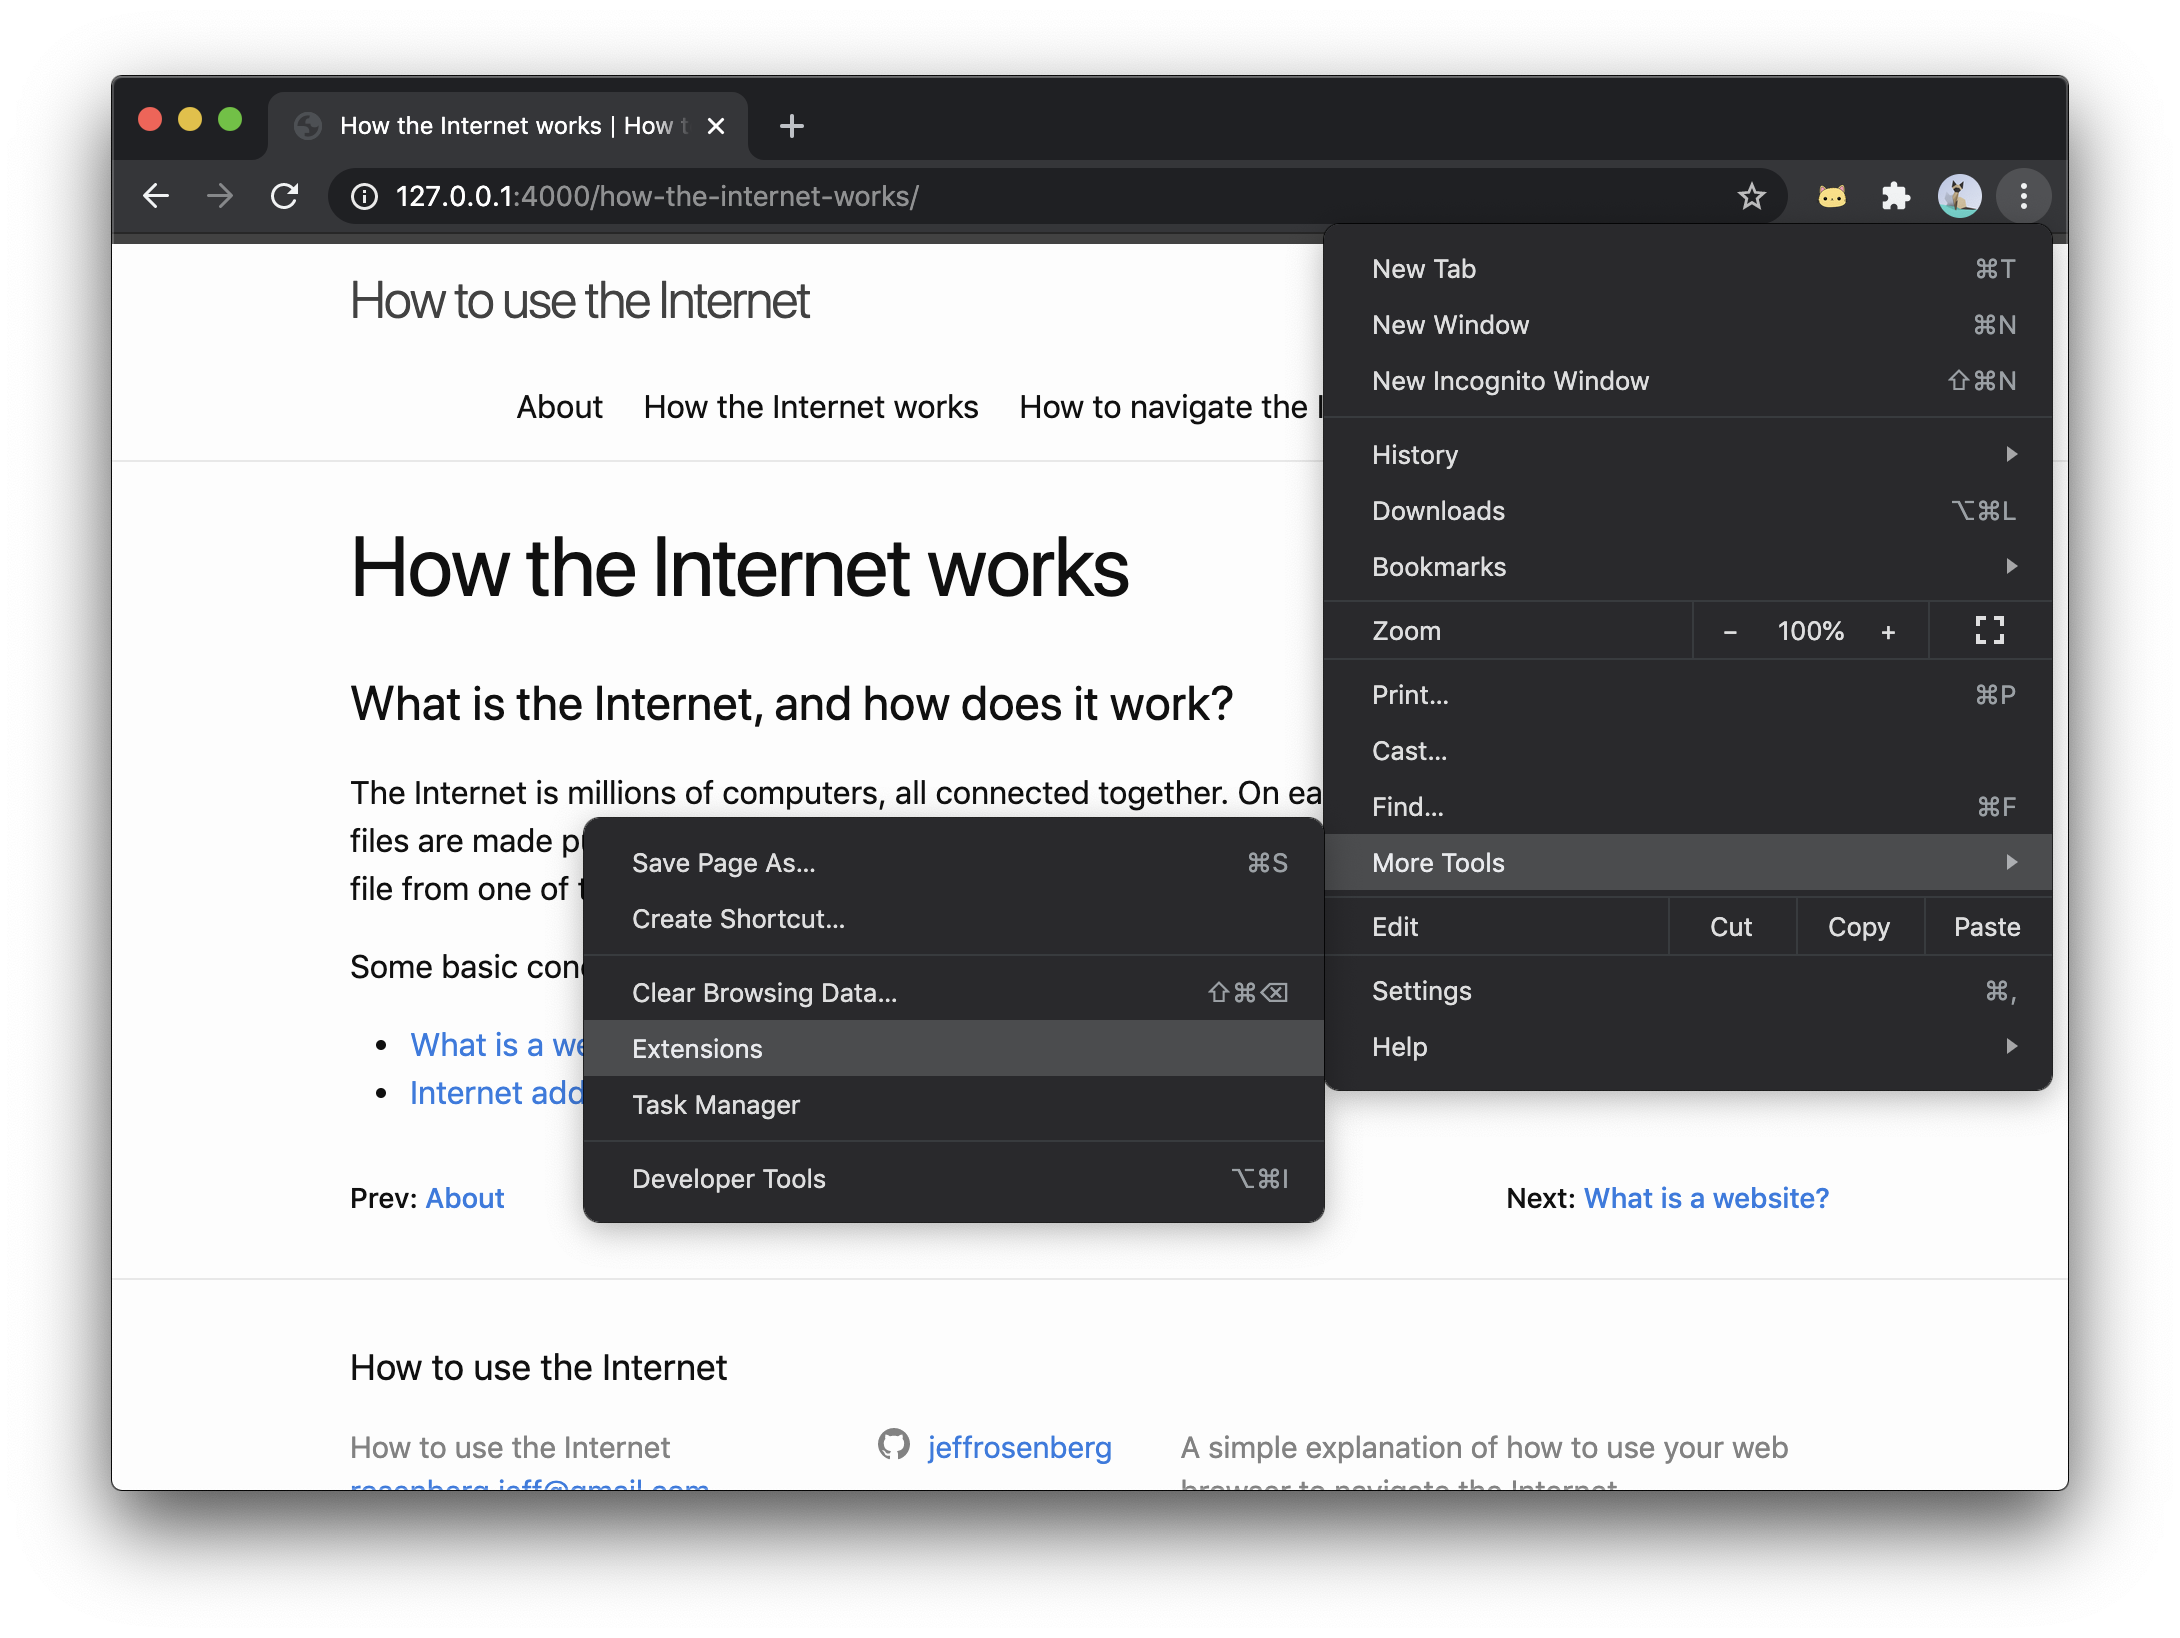 How to find extensions in the Chrome menu